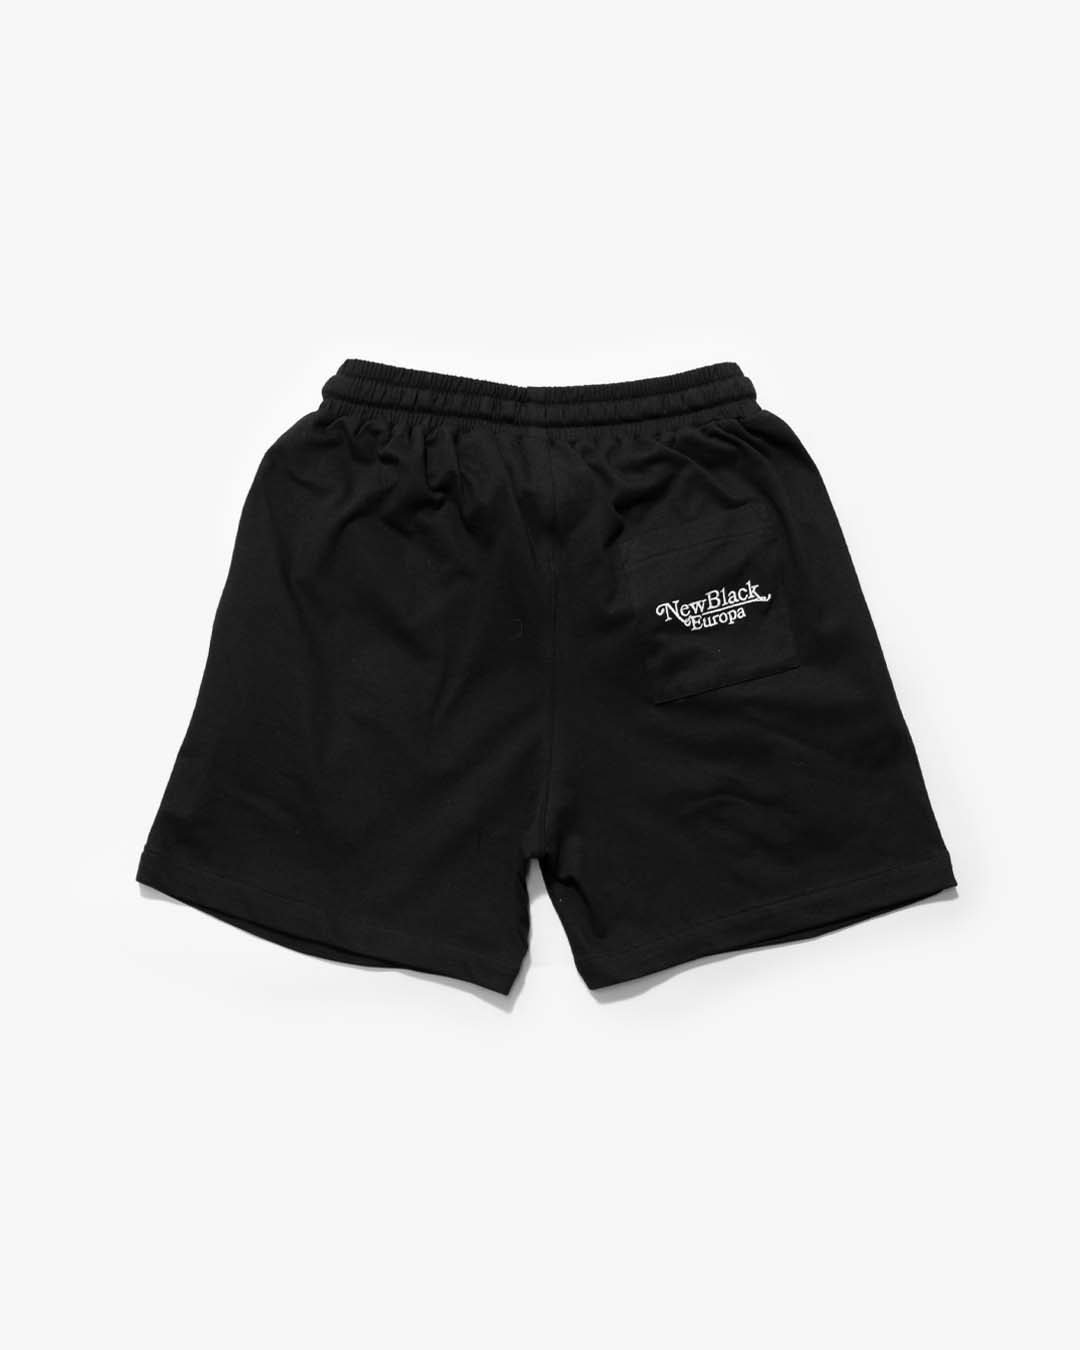 Luxe Shorts - Black